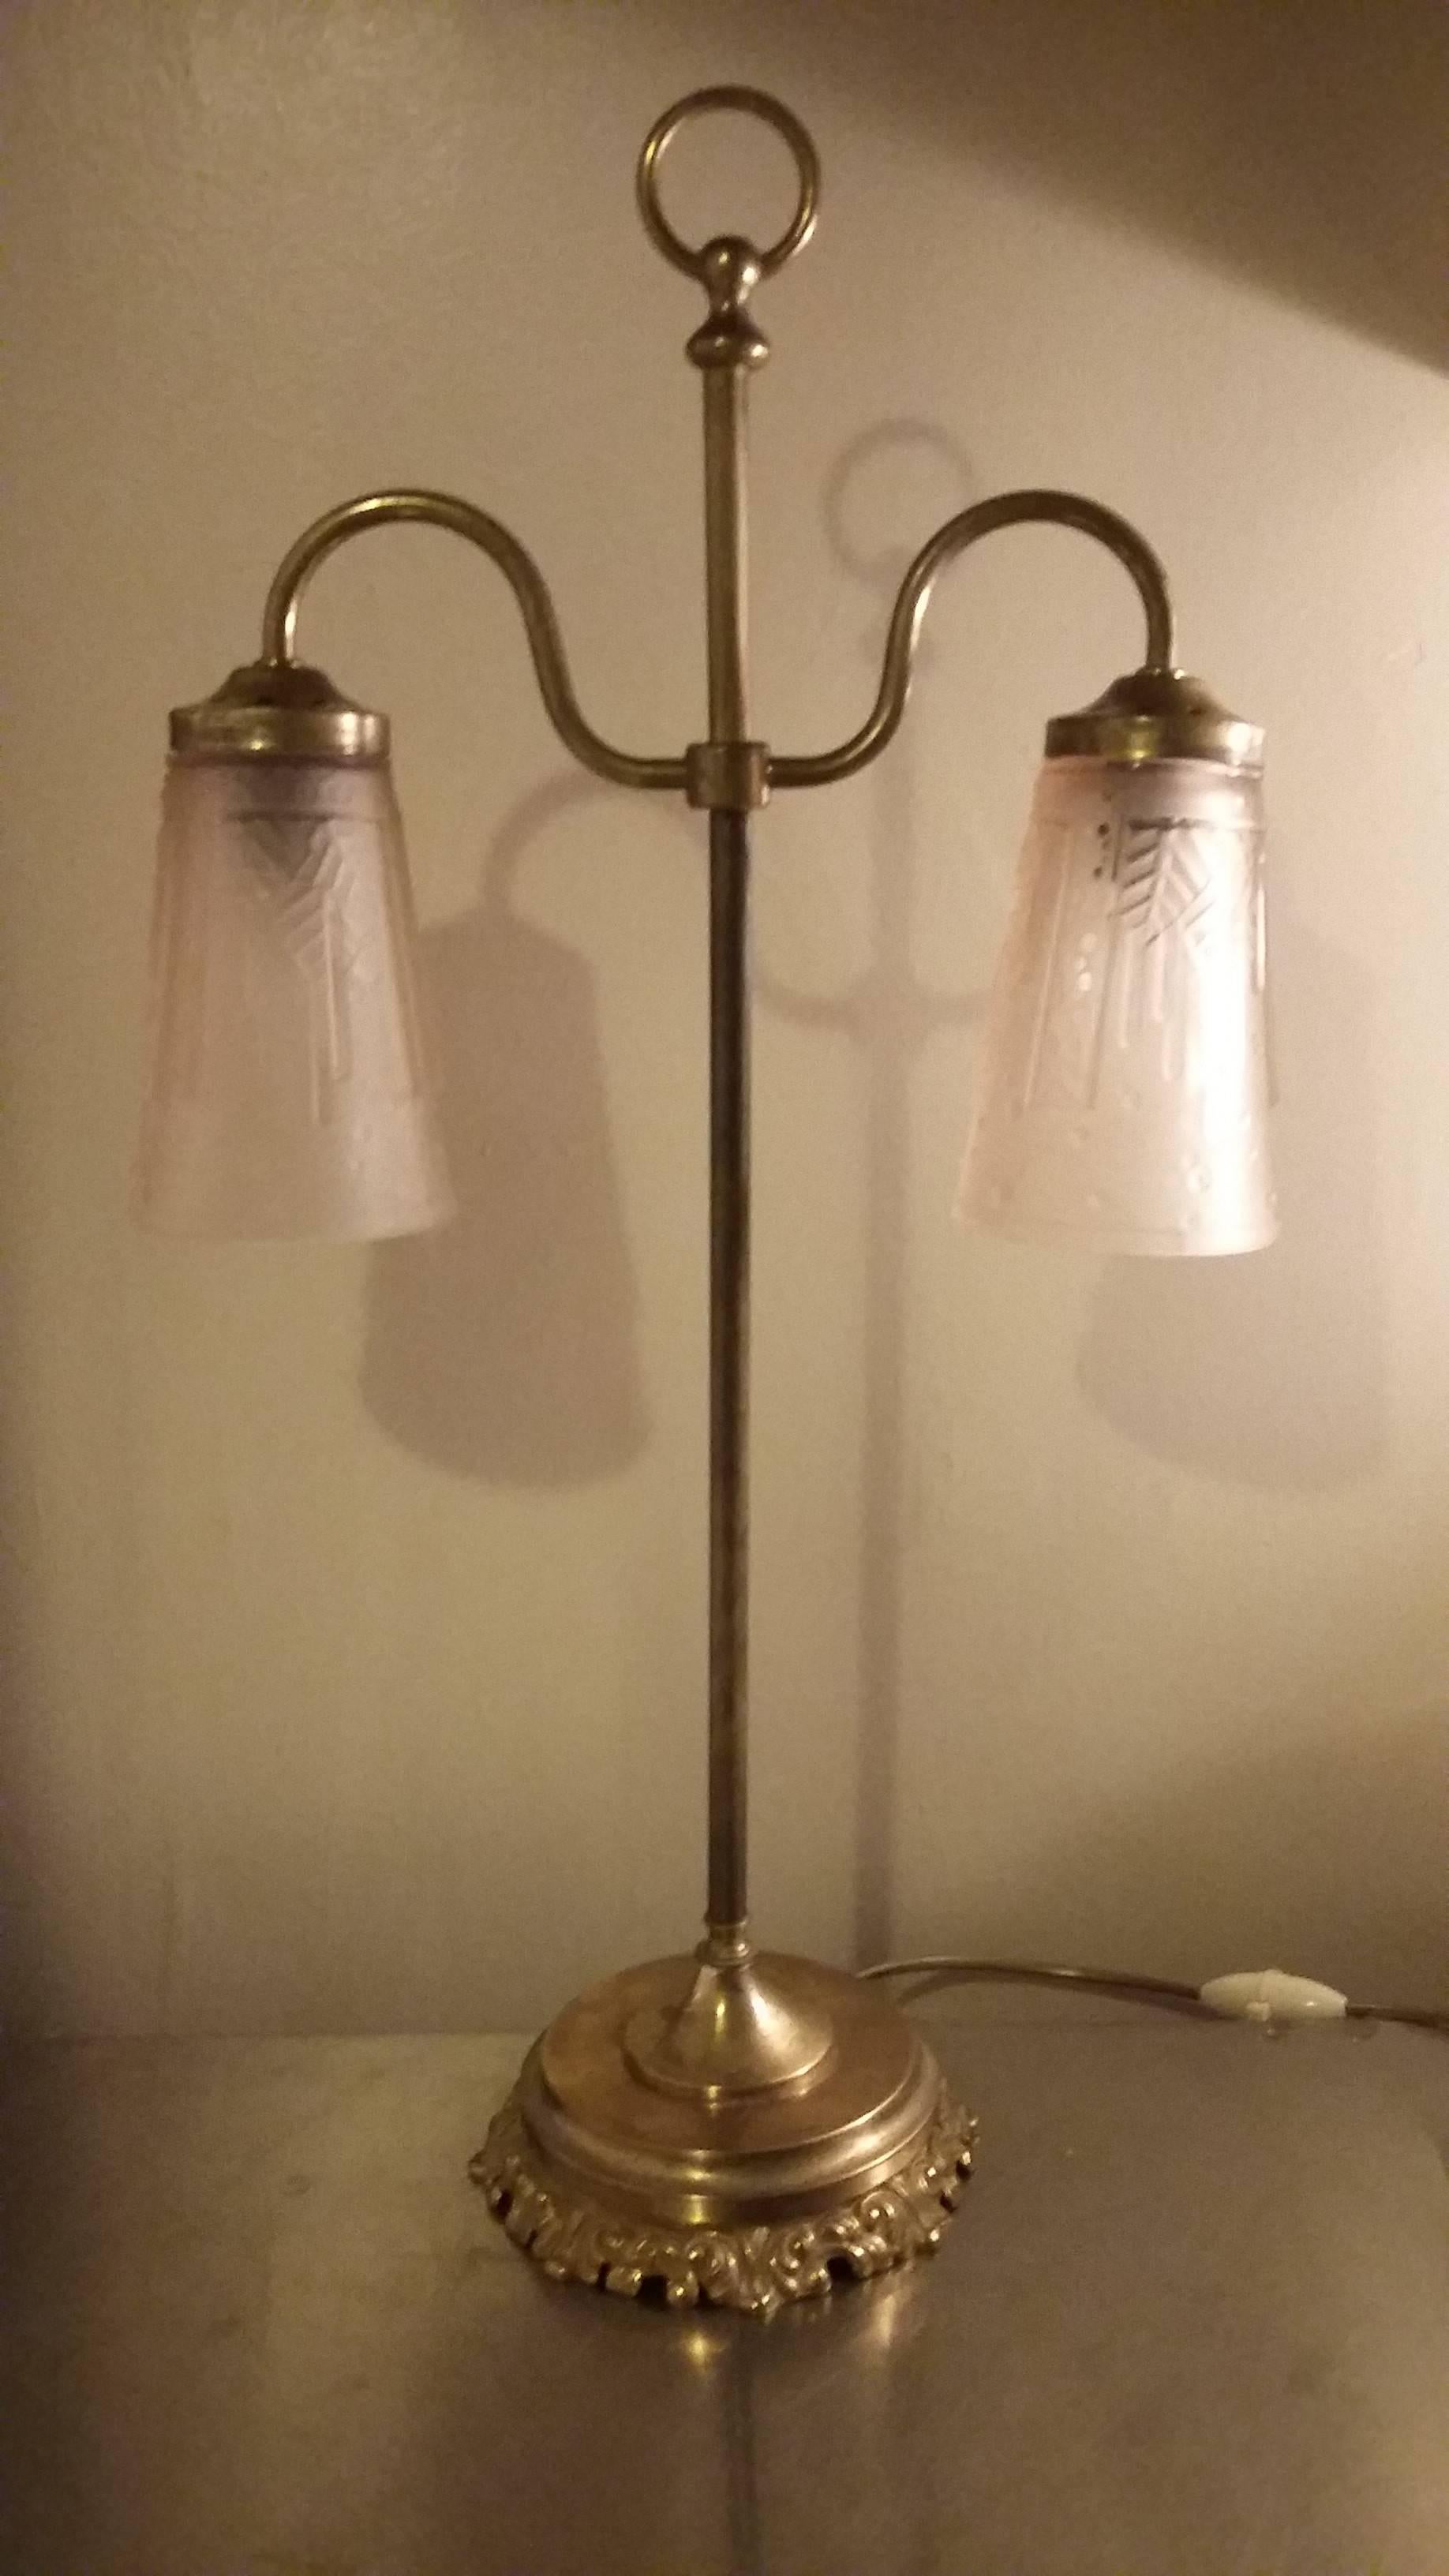 French tall double two arms table lamp in a bronze and brass base foot and two tulip style lampshades in cast pressed glass in light pale rose color.

Signed by Muller Frères Luneville, circa 1920

Very good condition, the electric part has been